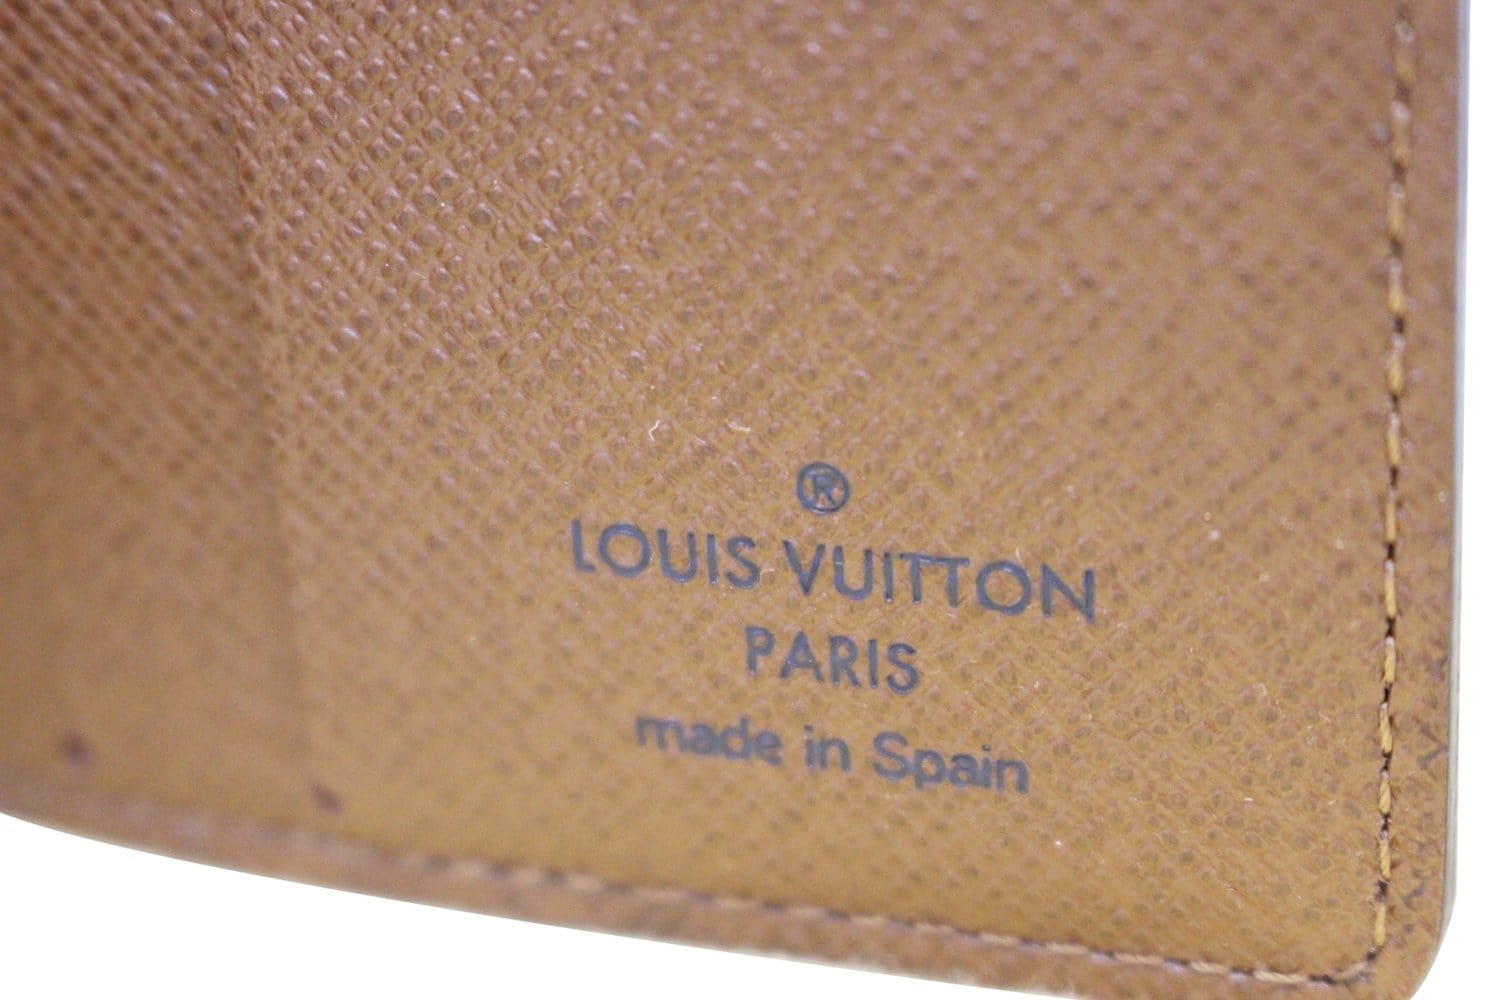 Louis Vuitton Date Book - 6 For Sale on 1stDibs